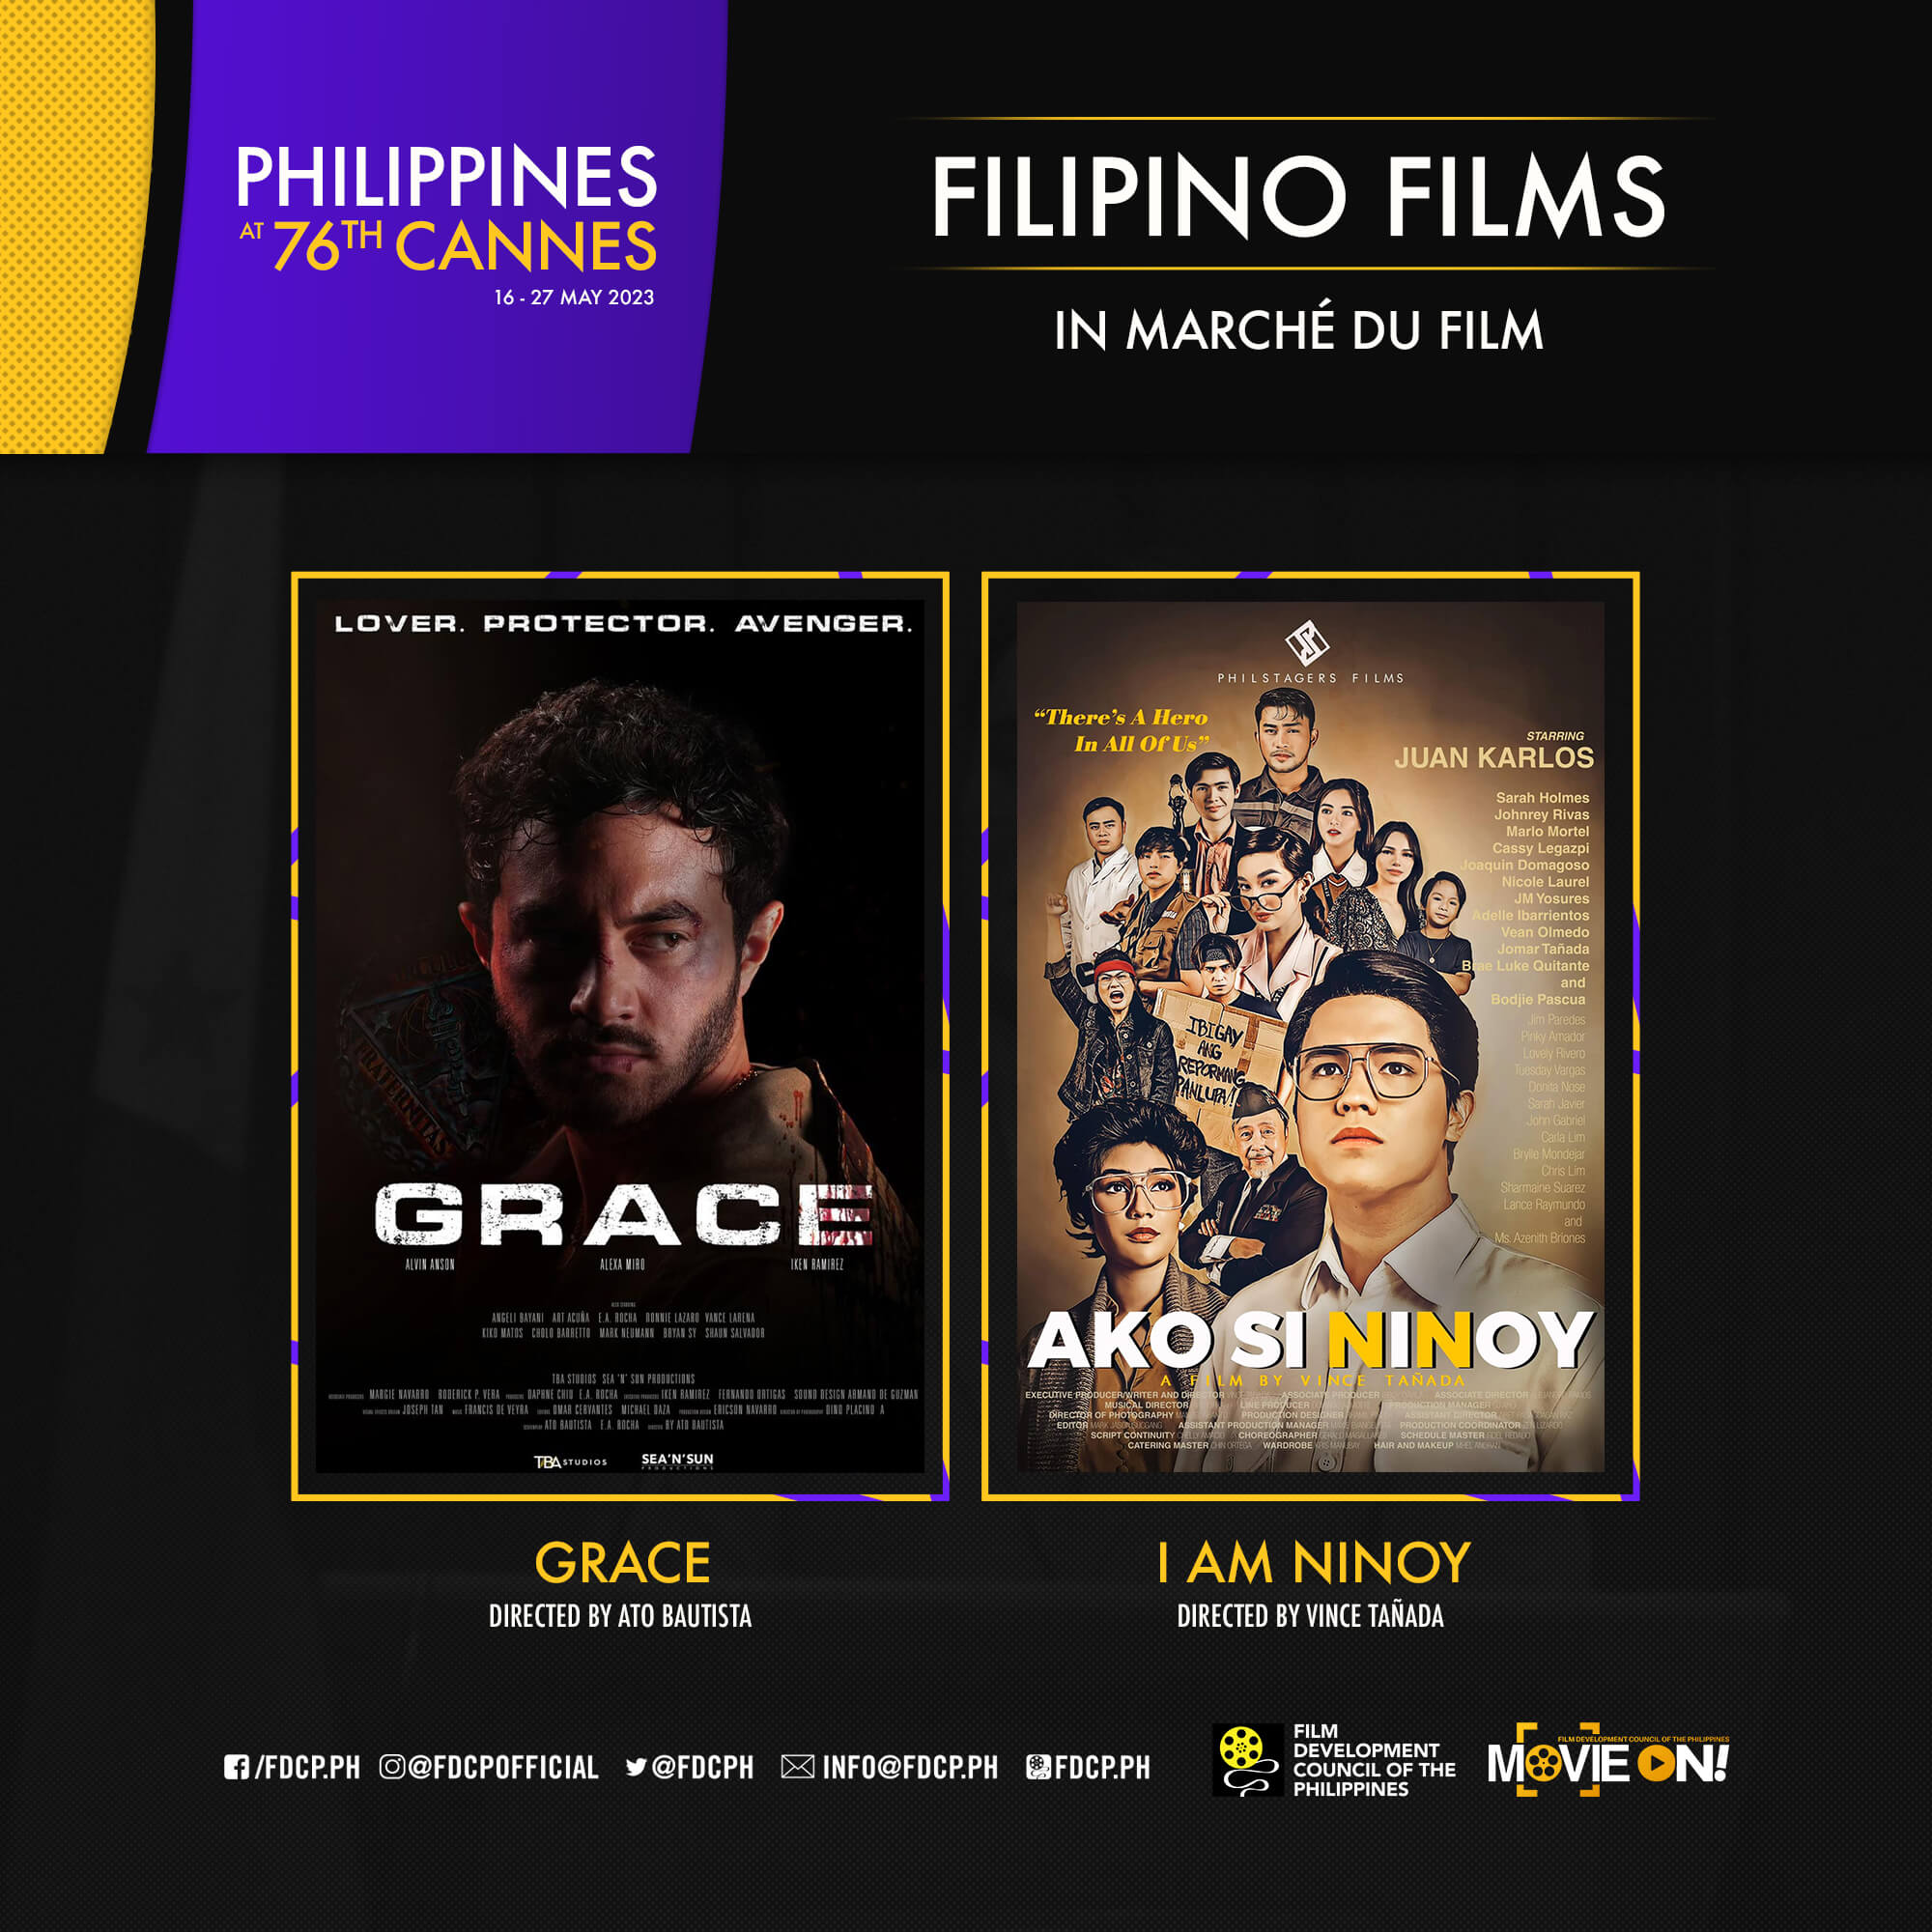 The official posters of "Grace" and "Ako Si Ninoy"